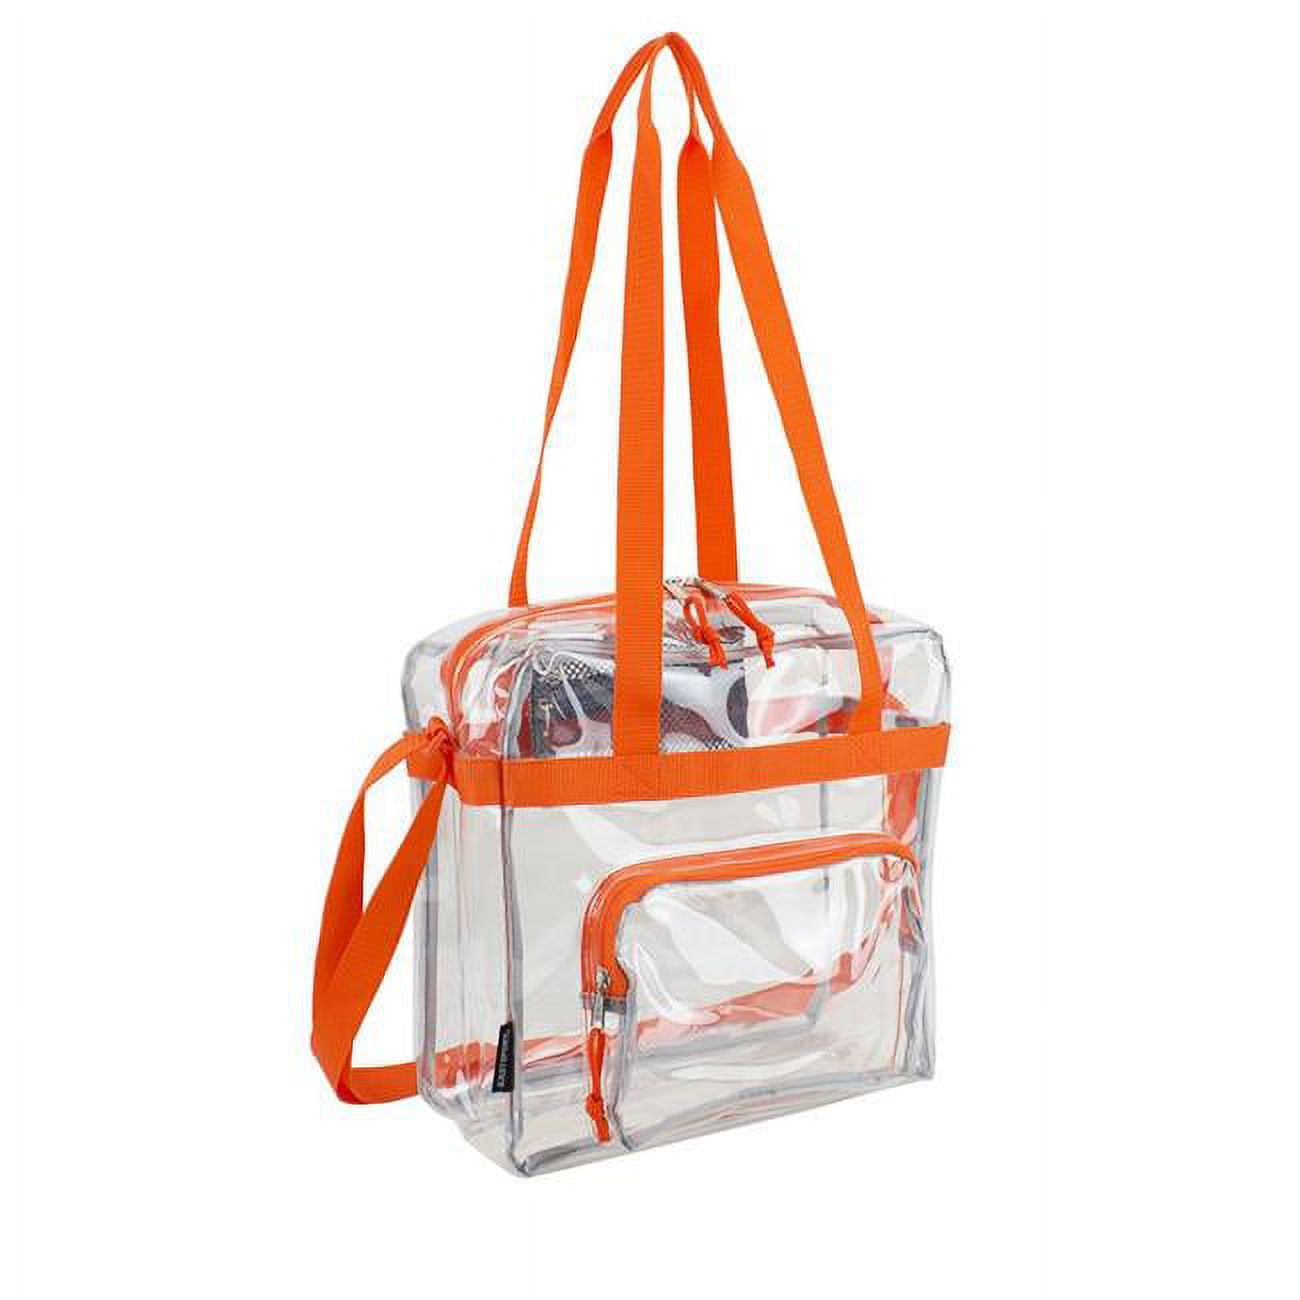 Clear Nfl Approved Stadium Tote, Orange - Case Of 12 - 12 Per Pack